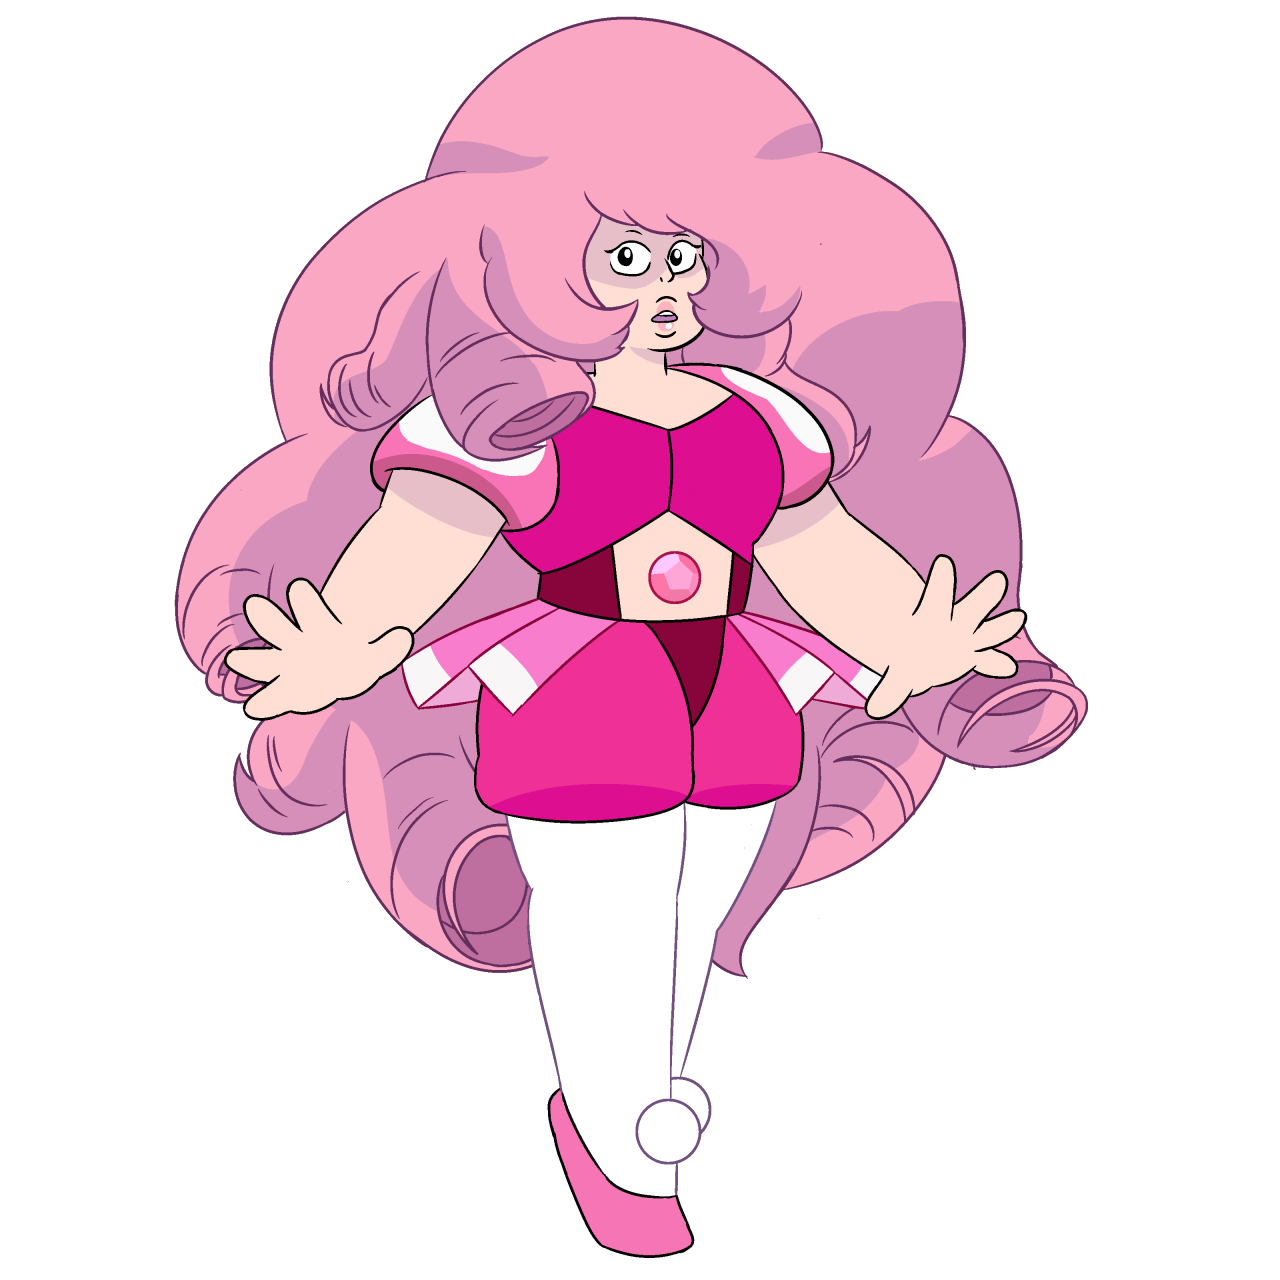 casualfictionwriterszine said: How would Rose look like in Pink Diamond's outfit? Answer: She would probably hate to be back in this outfit.